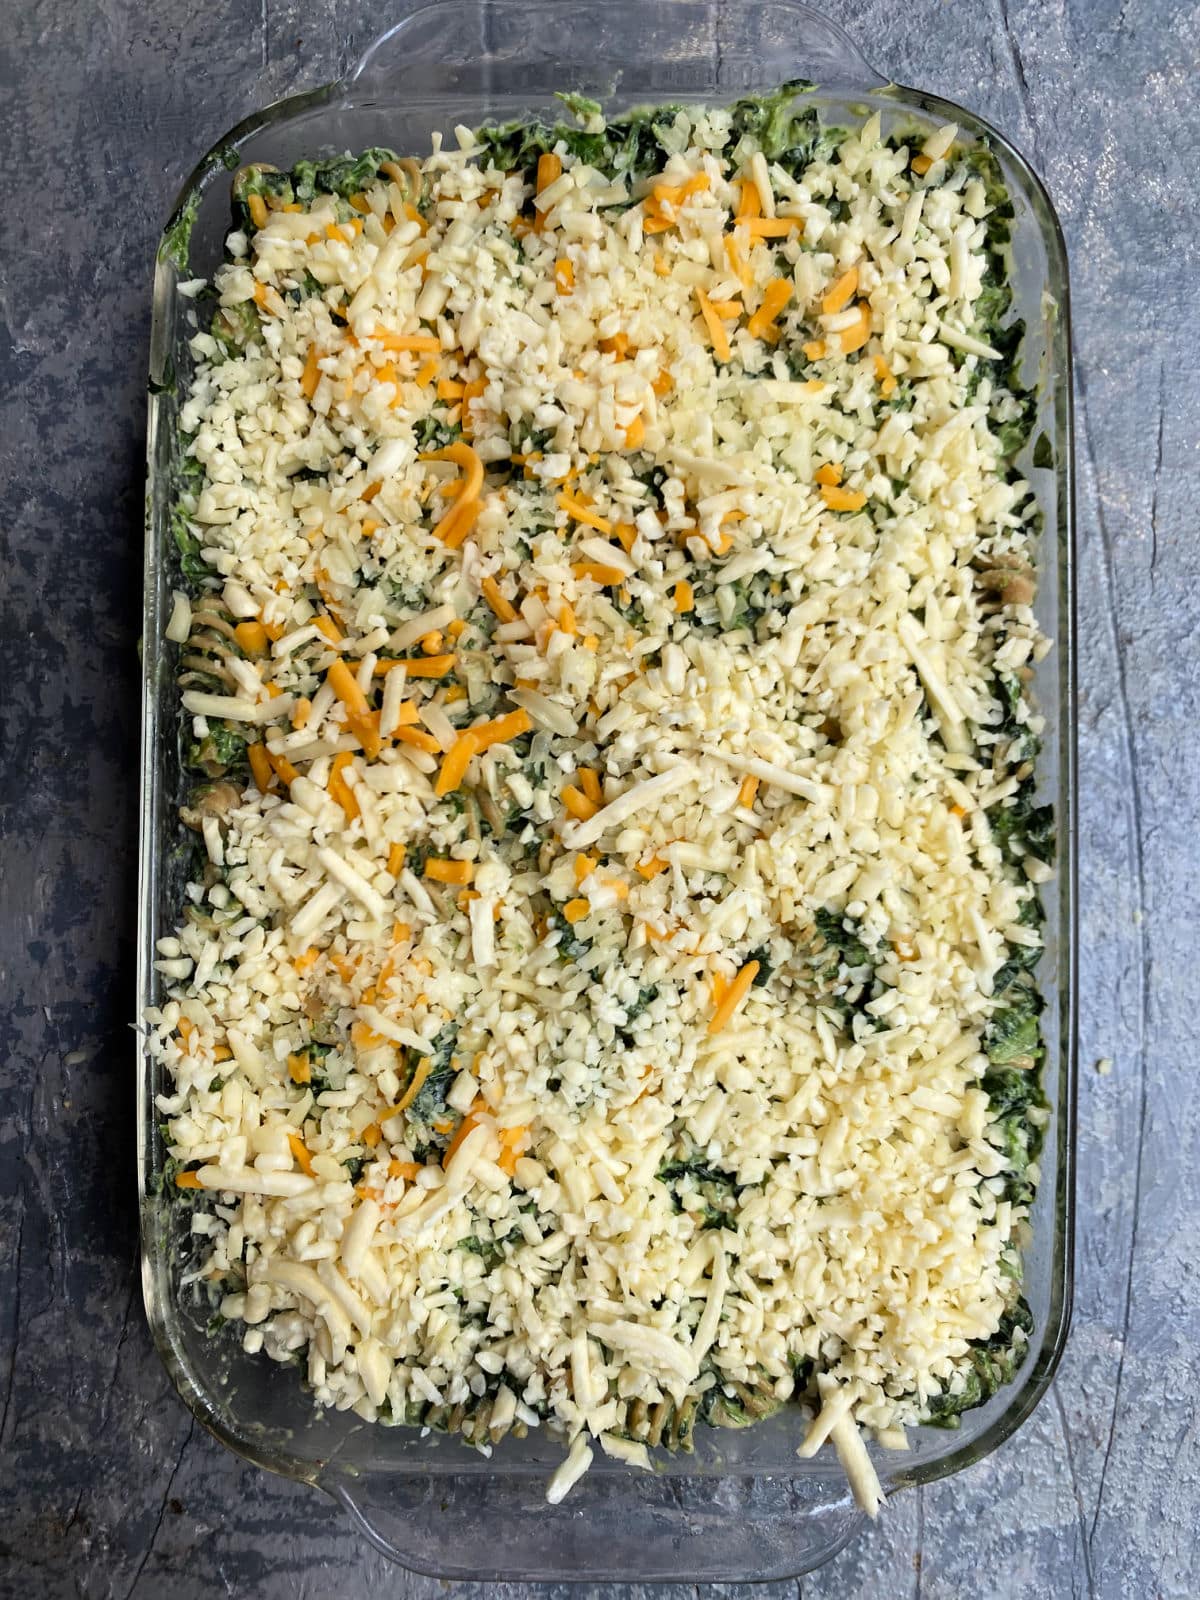 Creamed spinach and chickpea pasta in a baking dish topped with cheese